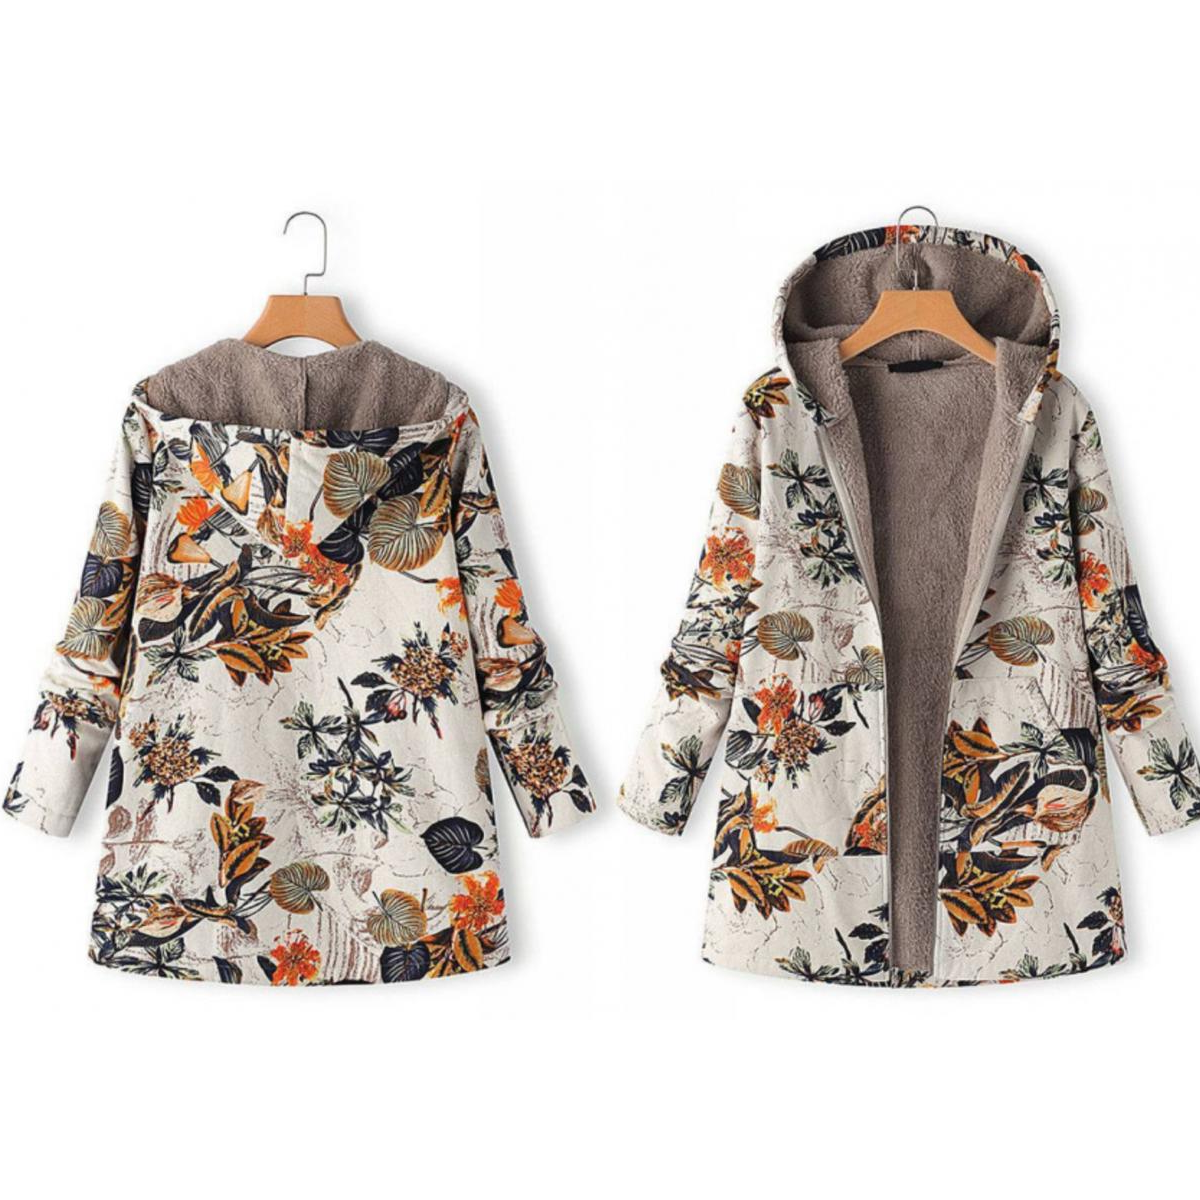 Orange Women's Floral Print Hooded Coat Keep wrapped up this season fashionable stylish, on trend womens women womans woman winter coat winter Whiten white whist warmth trending Thermal rose Plush Lady Jacket's jacket hoody Hoodie hood girls girl flowers flower fashion design coats clothing clothes big coat beautiful Autumn